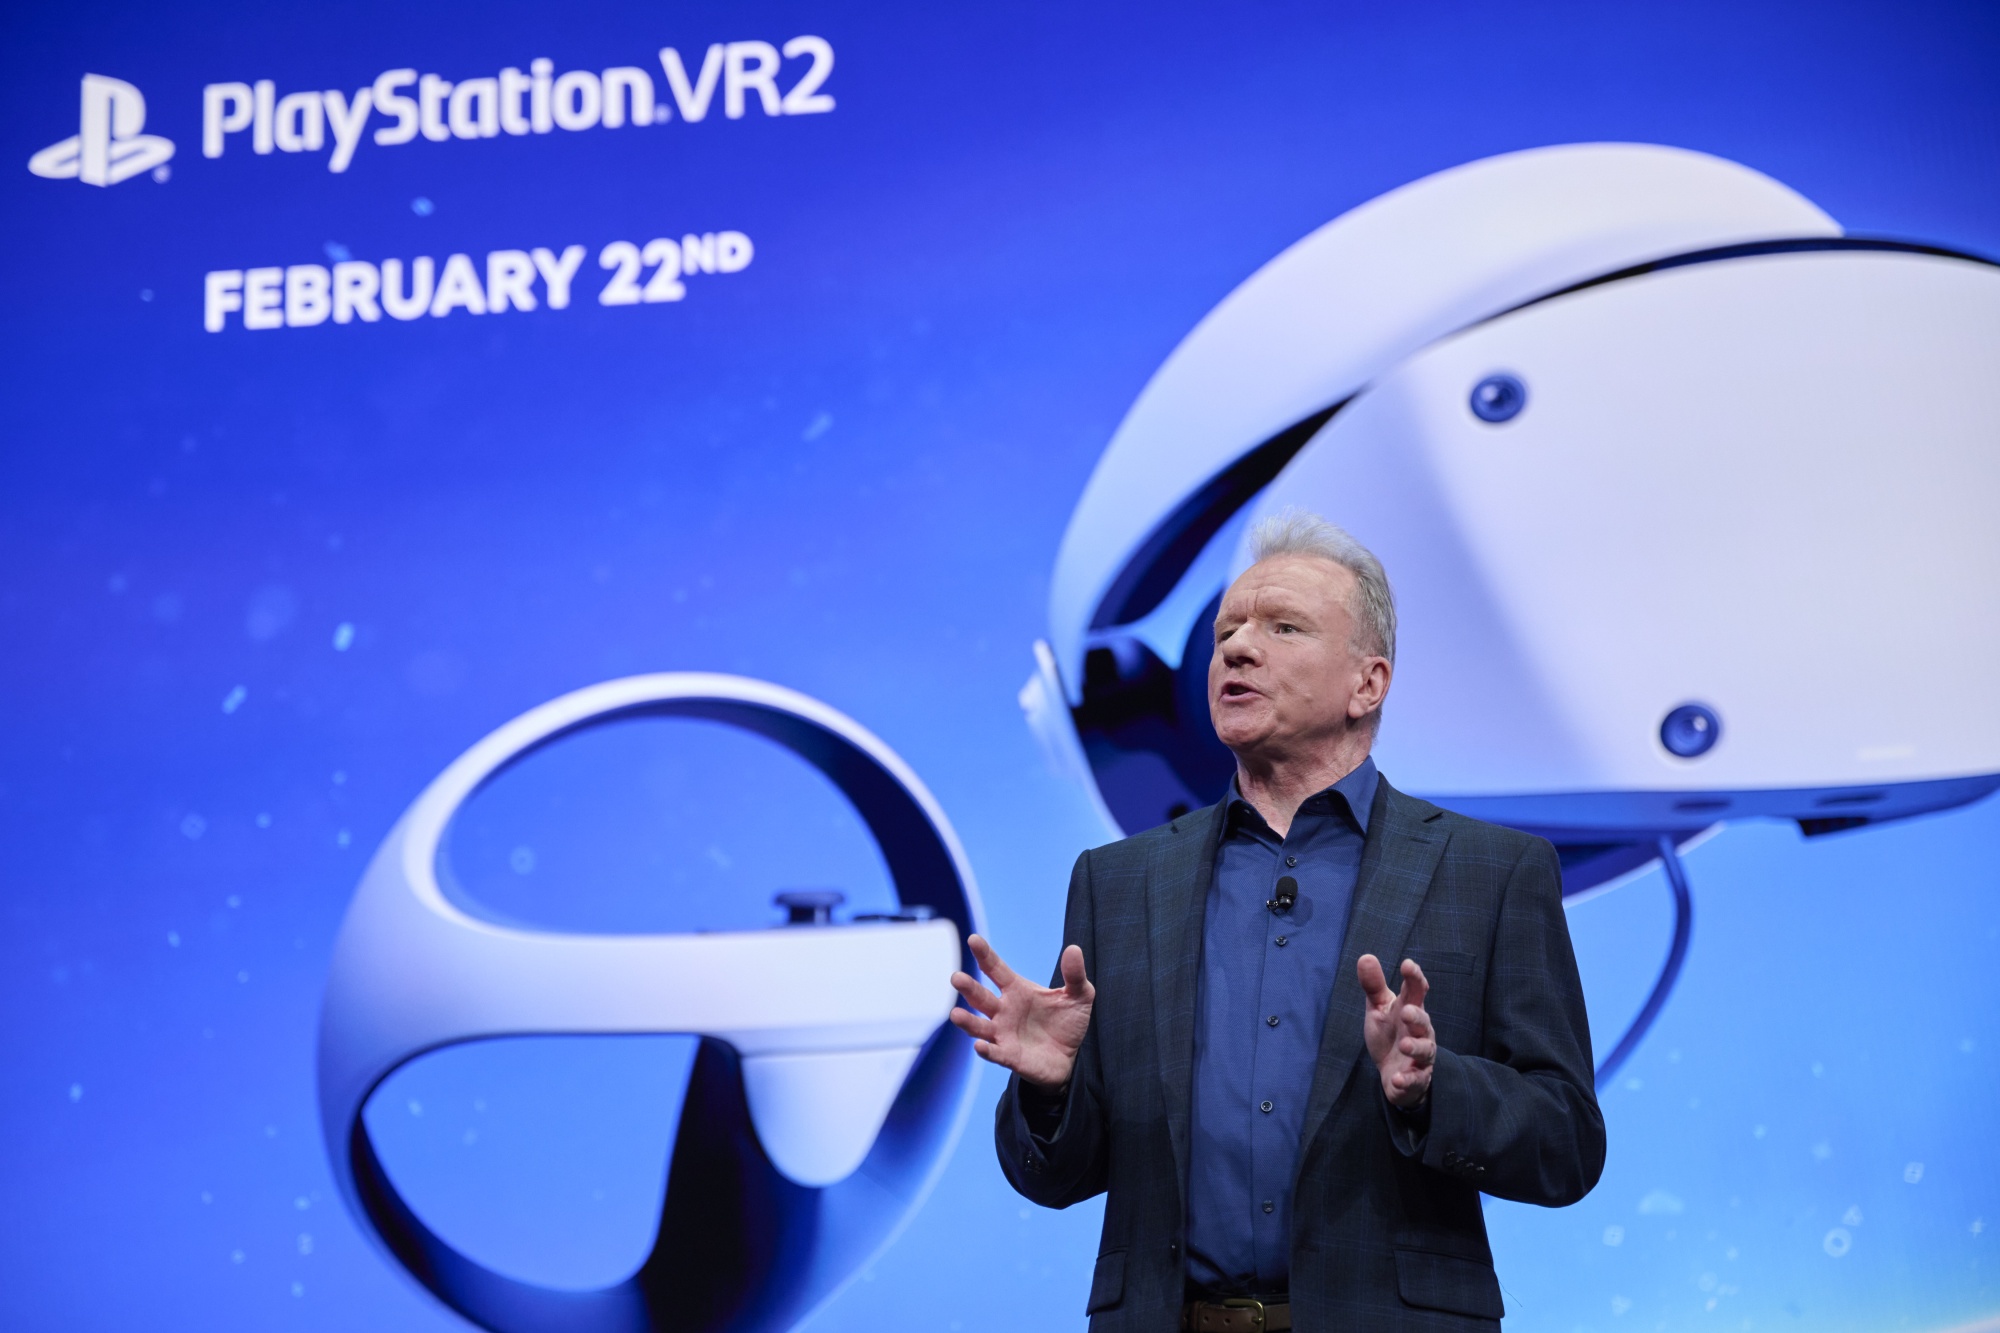 Sony reportedly halves PlayStation VR2 shipment forecast due to  disappointing pre-orders